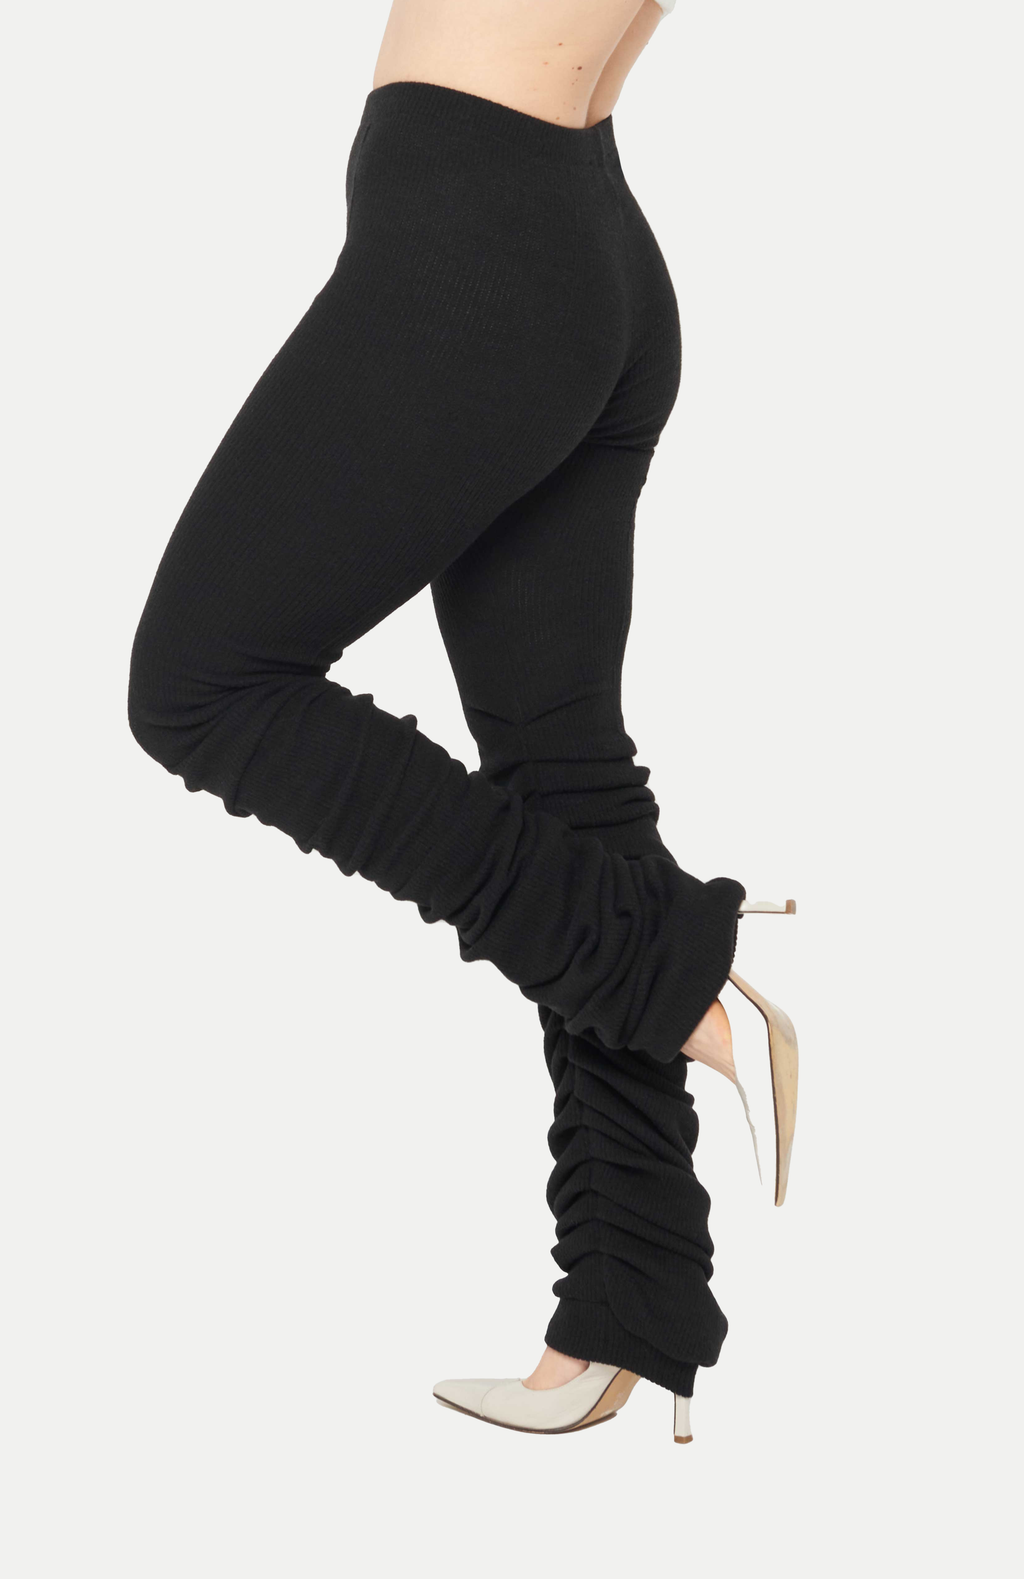 Maroske Peech High-rise wool-blend warm-up black leggings. Pleated inseam starts from the knee for a lamb leg effect. Flattering pin tucks run along the back and front of both legs giving you visual cues to correct your lines in the mirror.